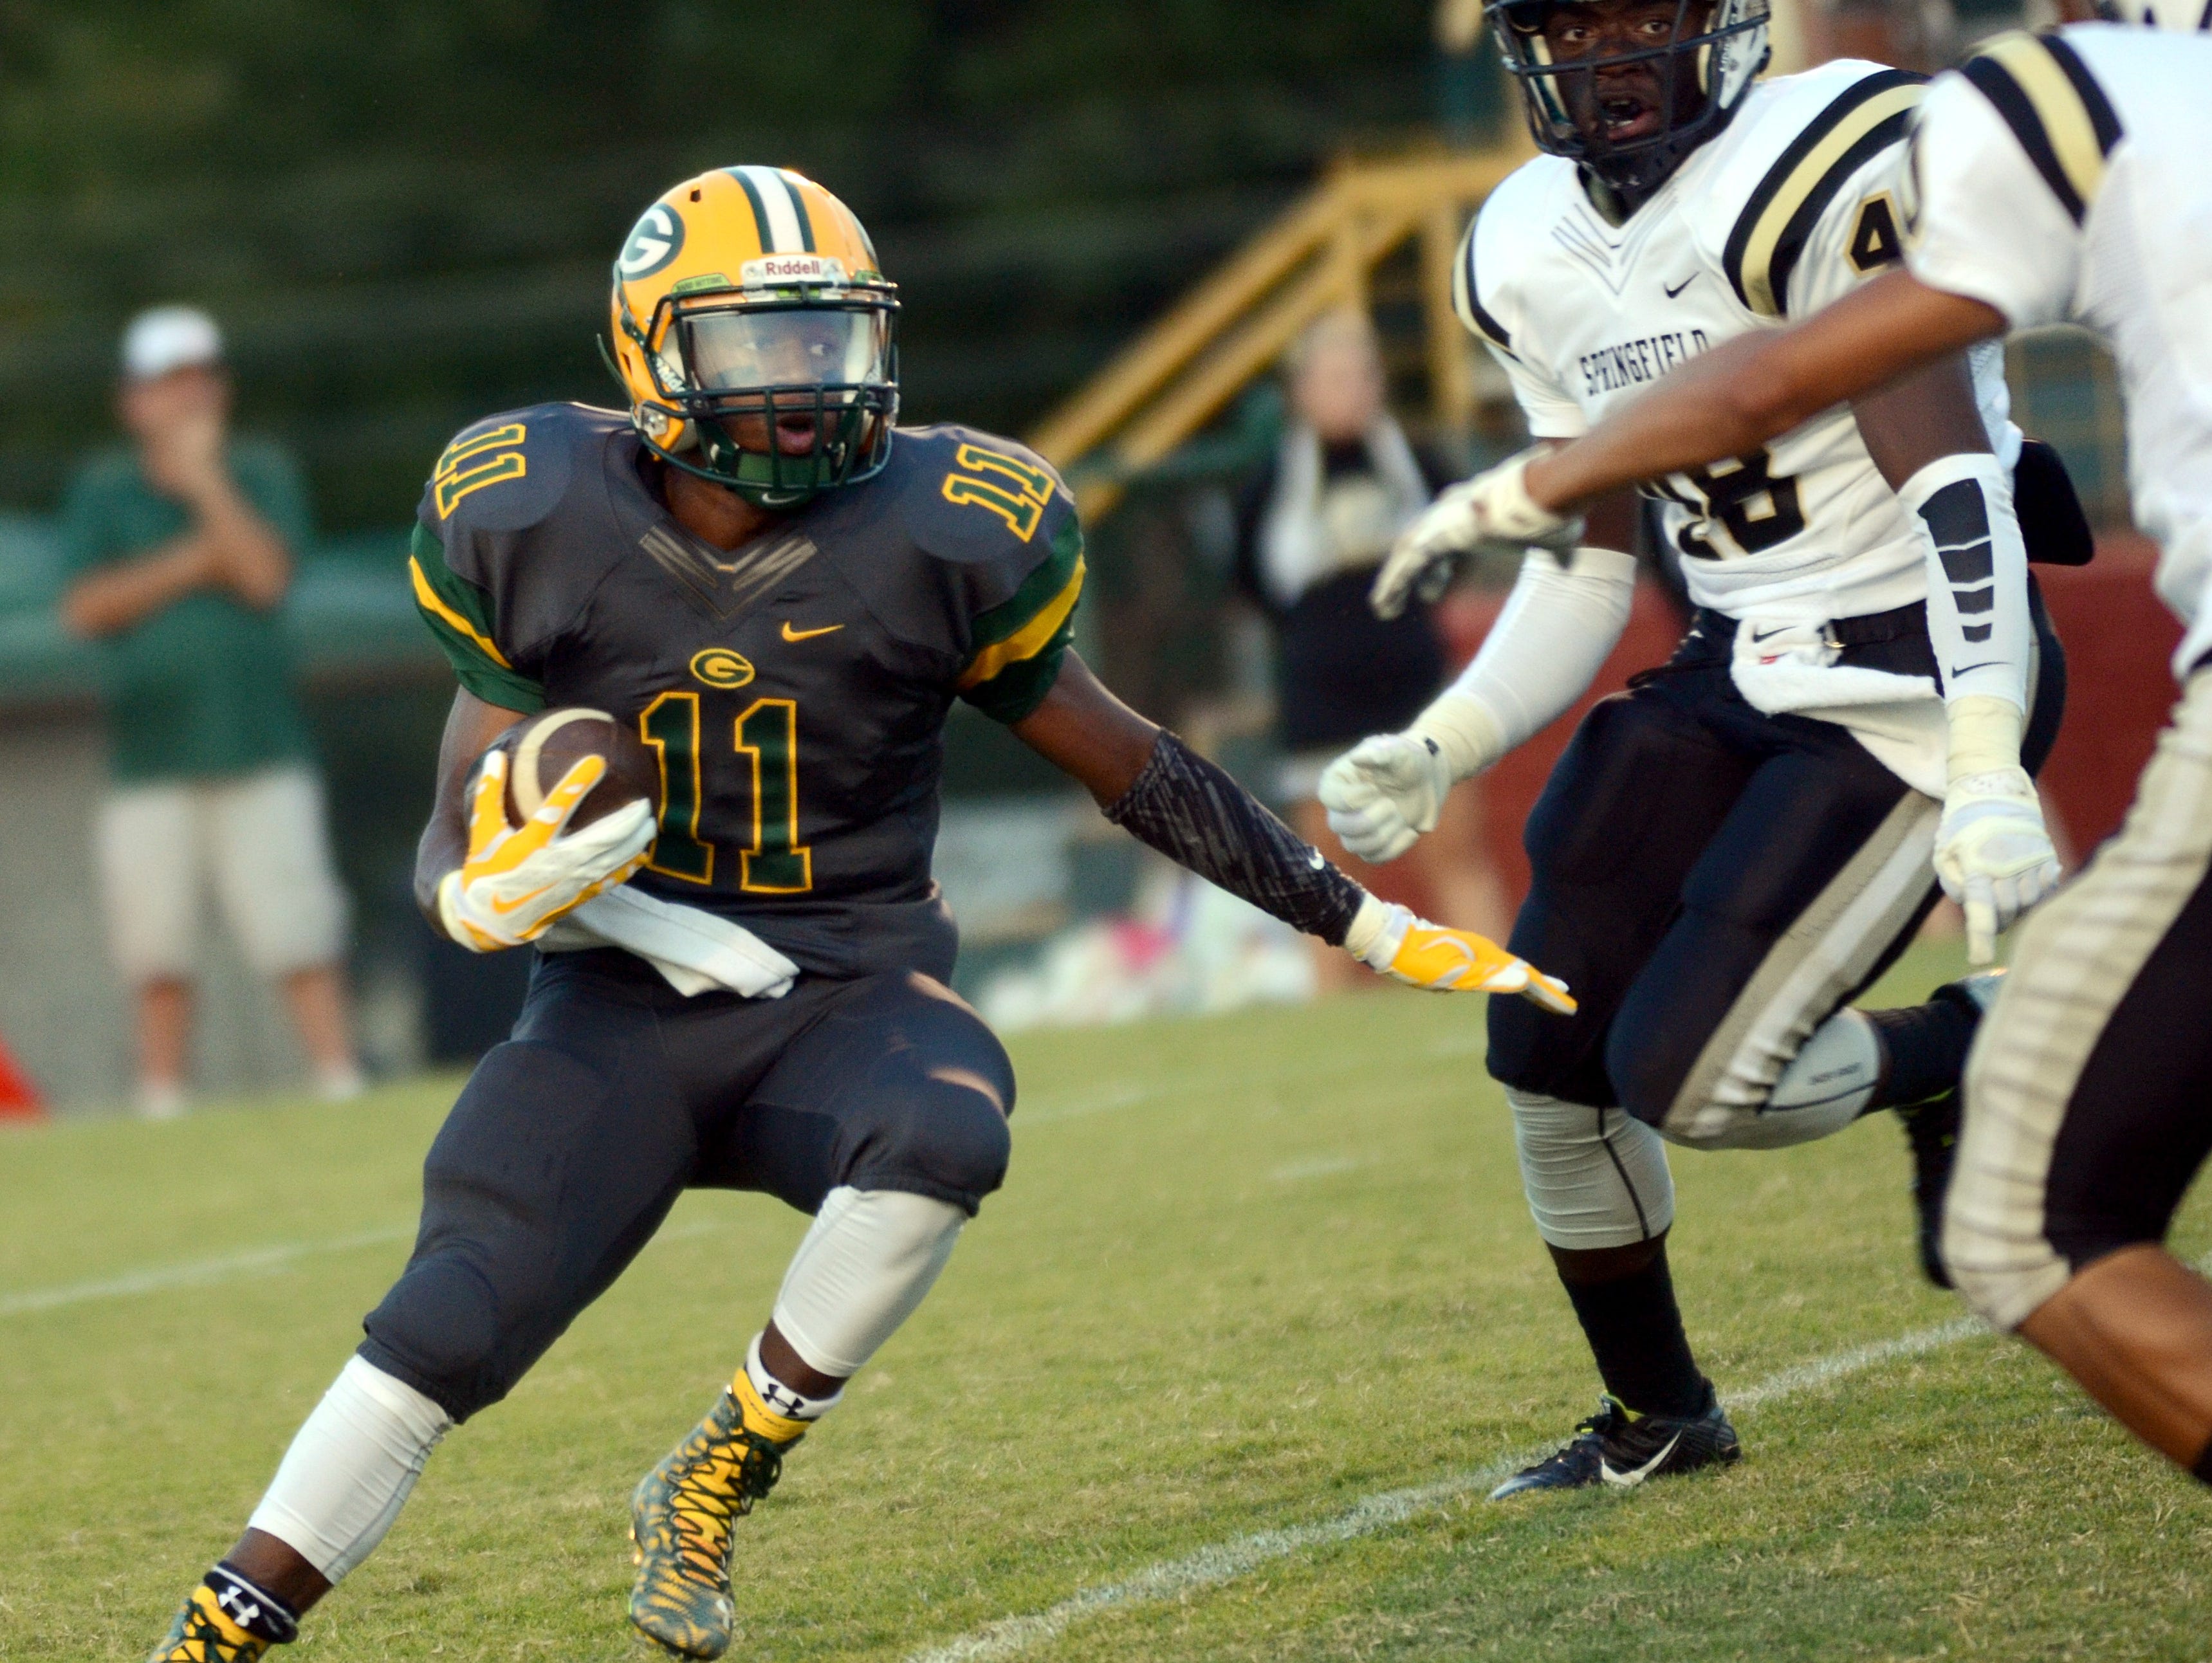 Gallatin senior Dezmond Chambers caught three touchdown passes in Friday's 50-49 overtime victory over visiting Henry County.